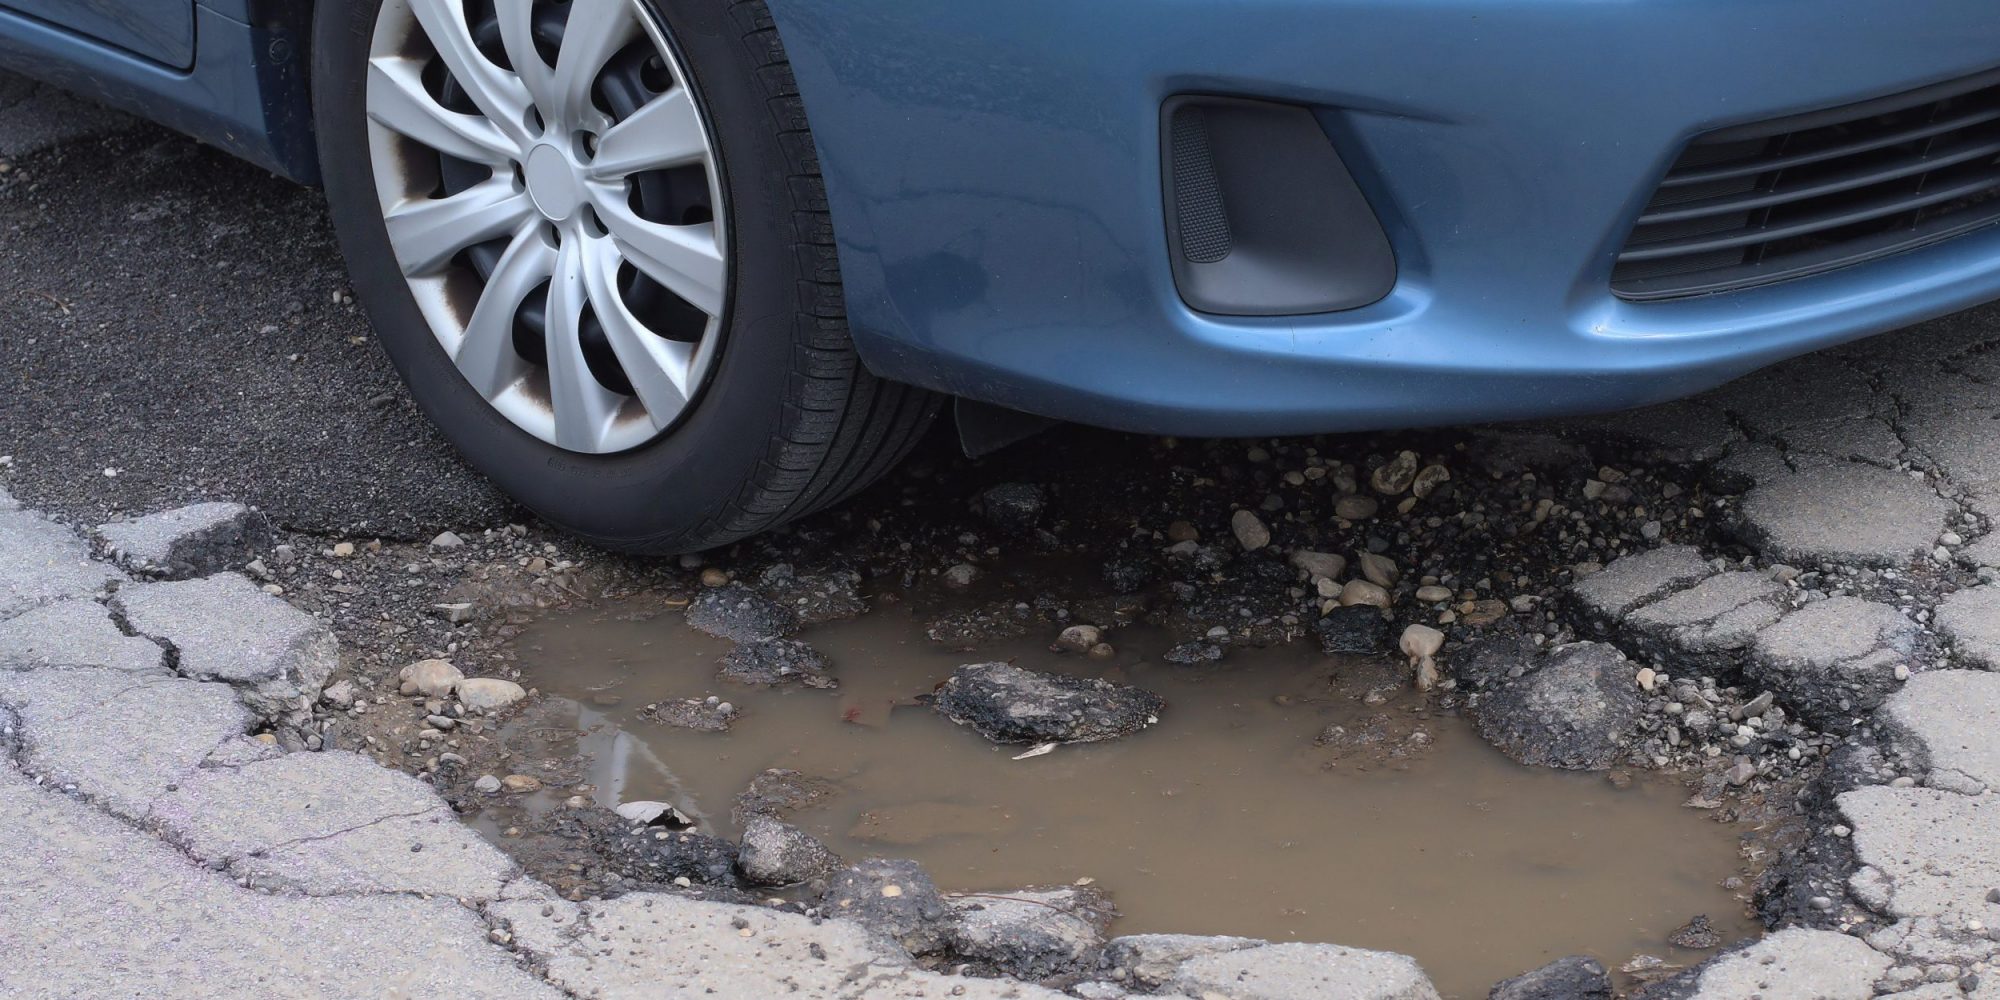 RAC report over 50% jump in potholes damage